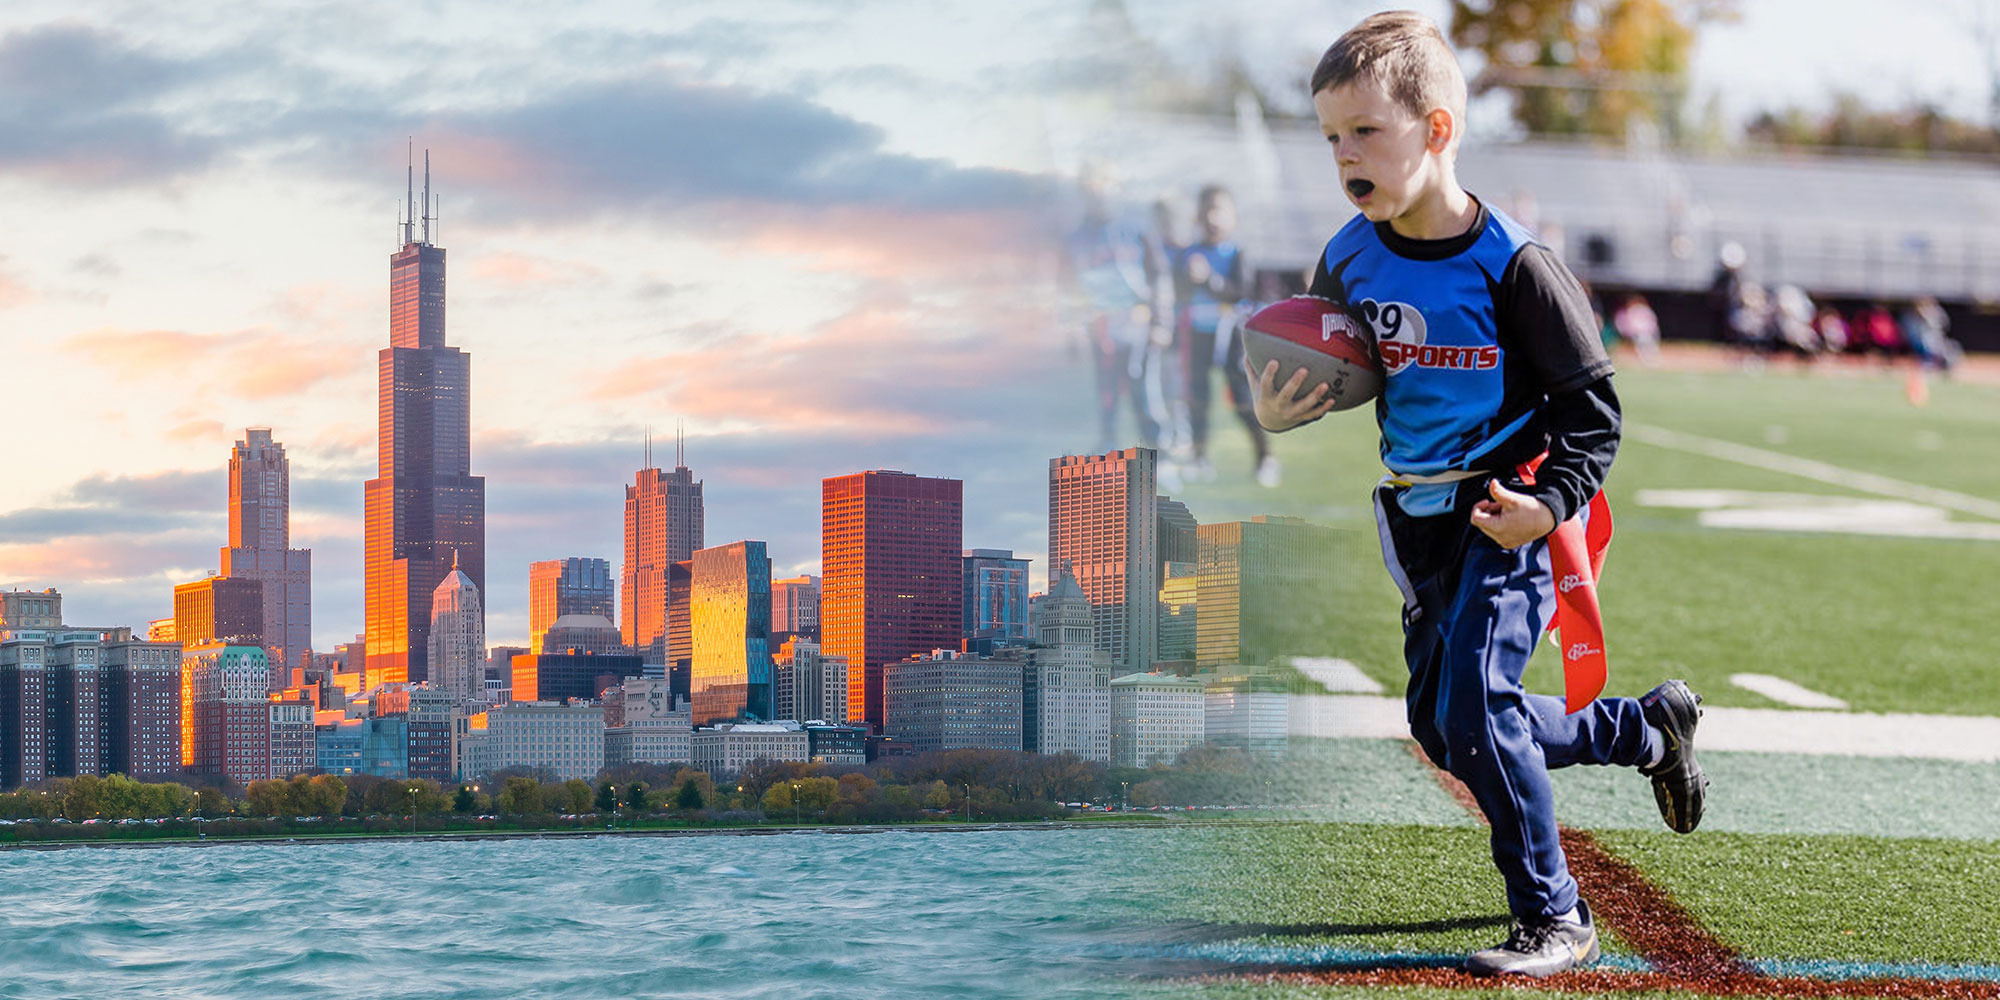 Chicago Business Opportunity: Why i9 Sports is Ready to Take Off